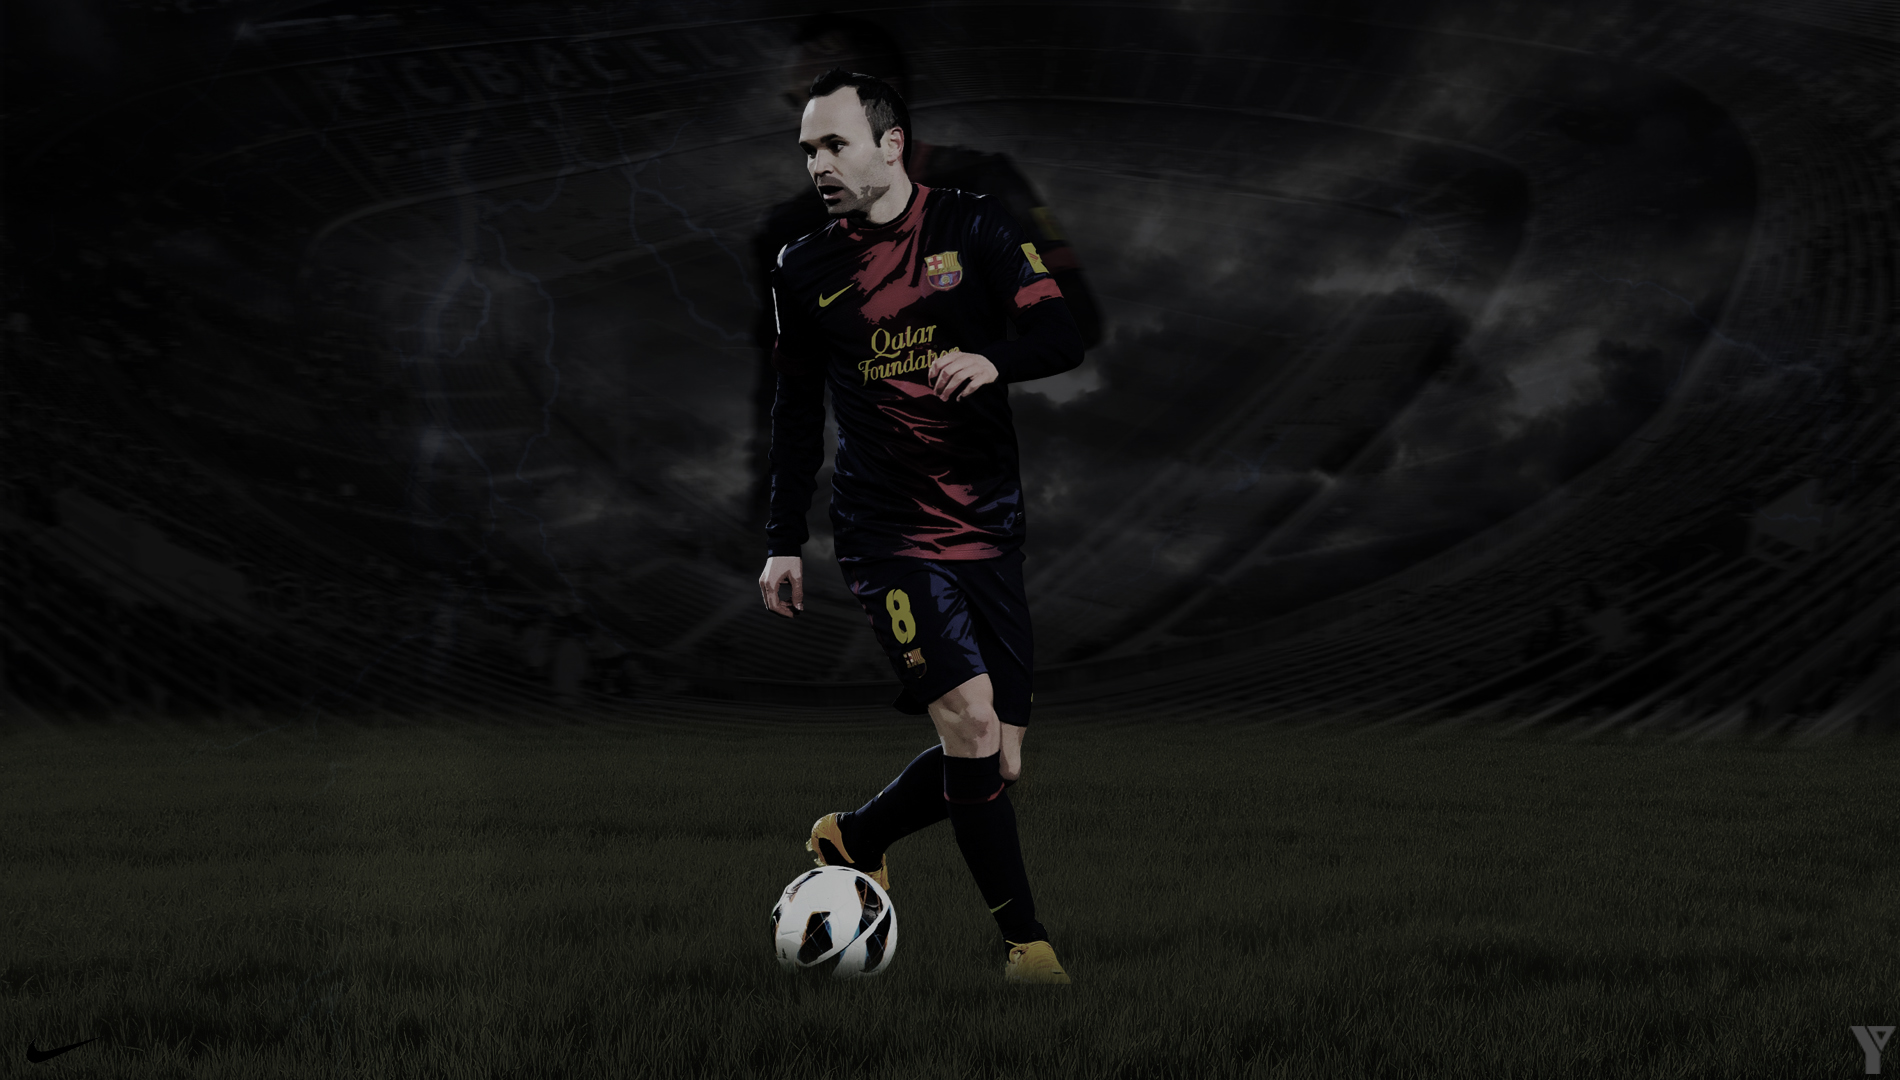 Andres Iniesta Wallpaper High Quality